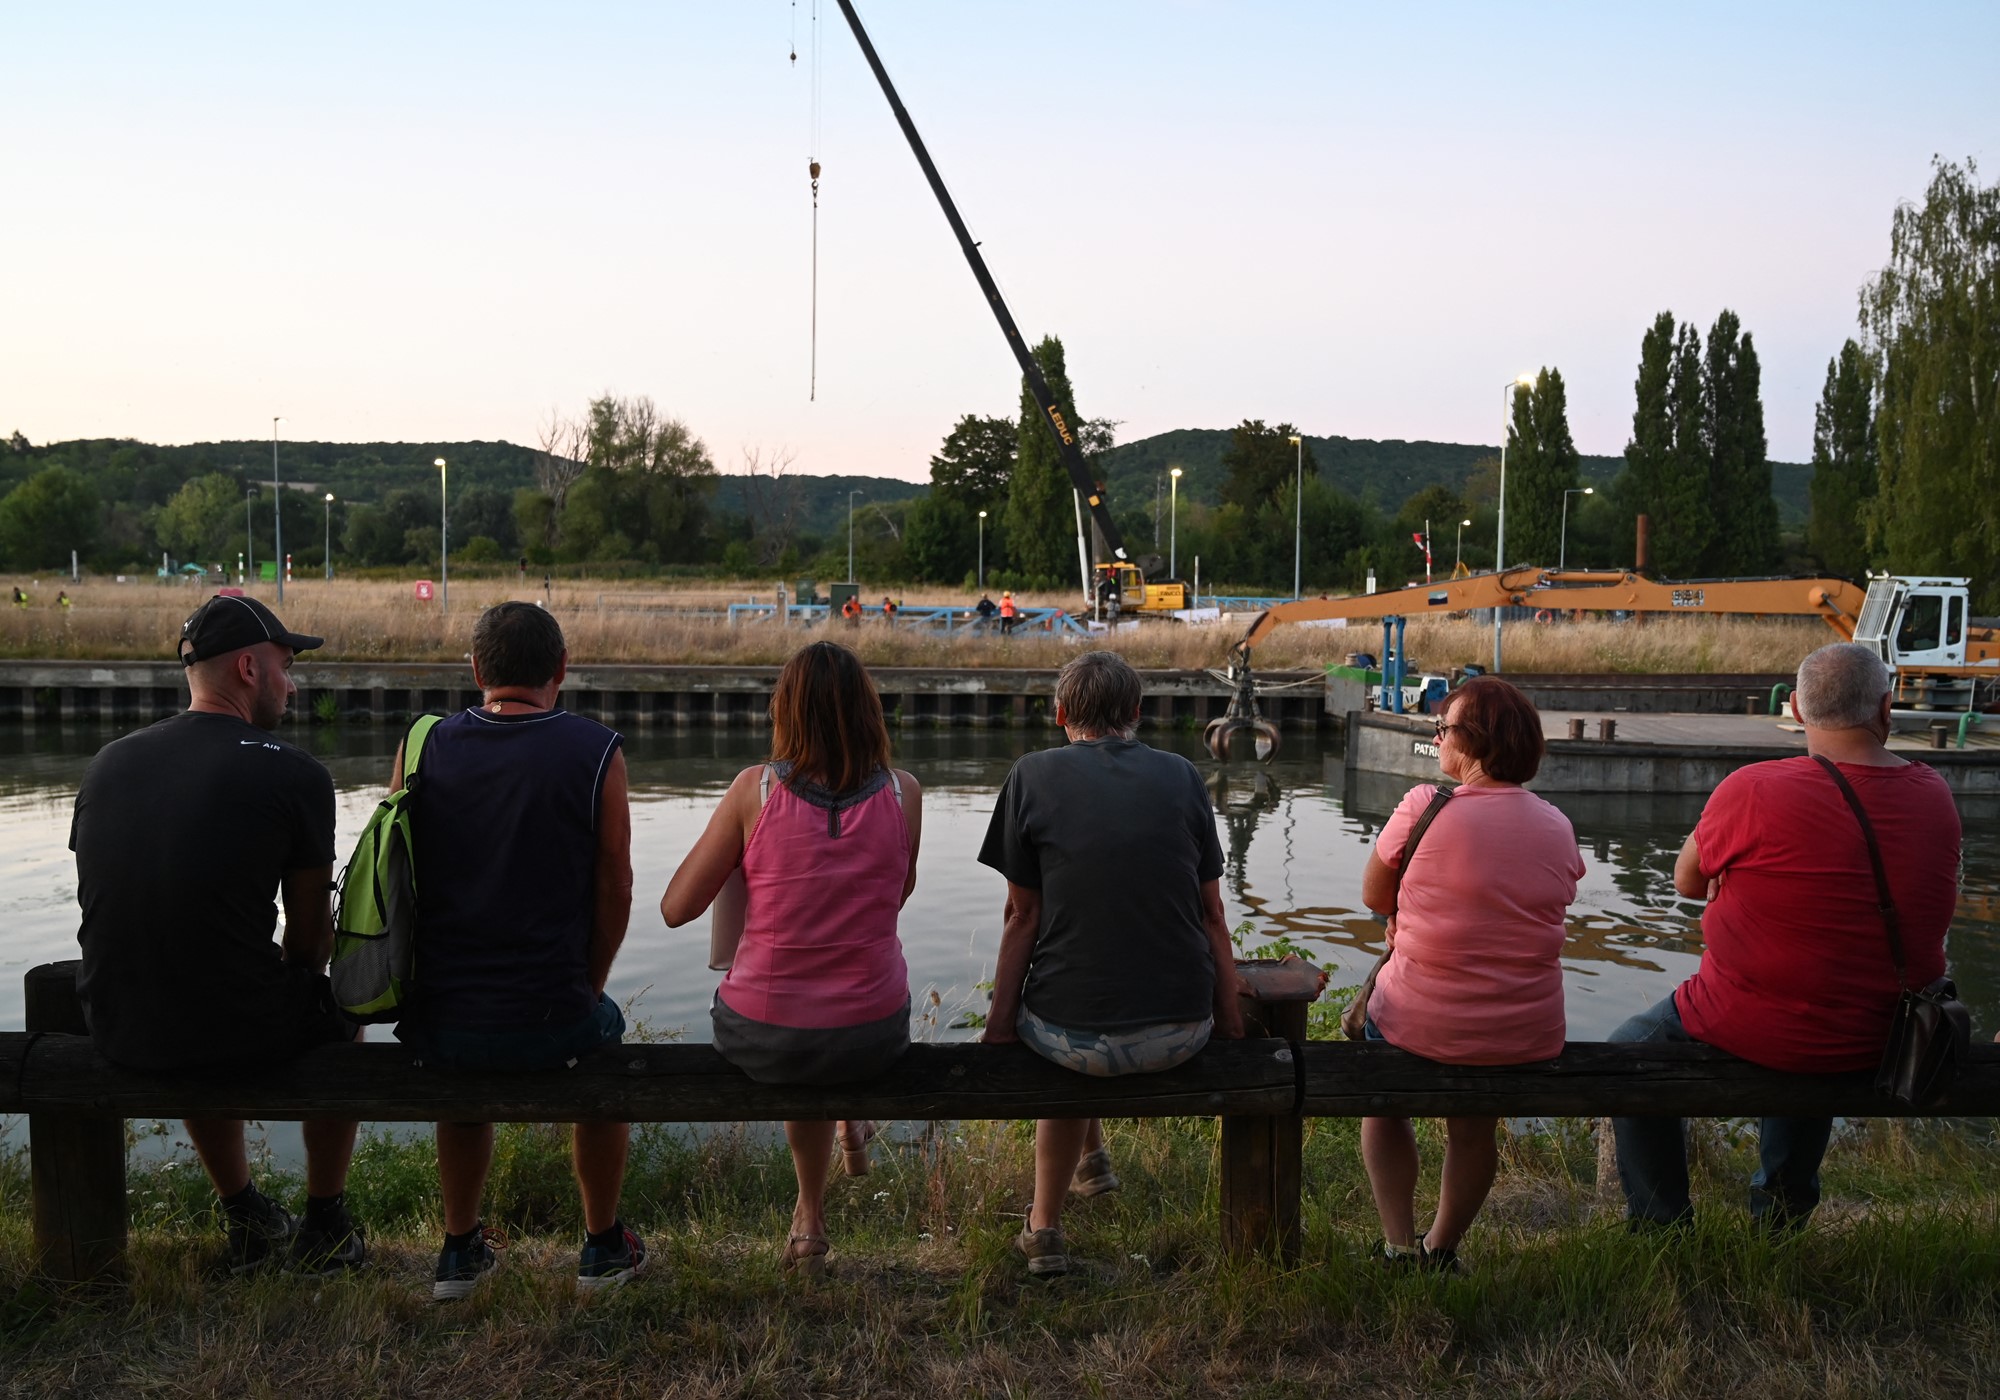 Onlookers sit and watch a crane over a river.